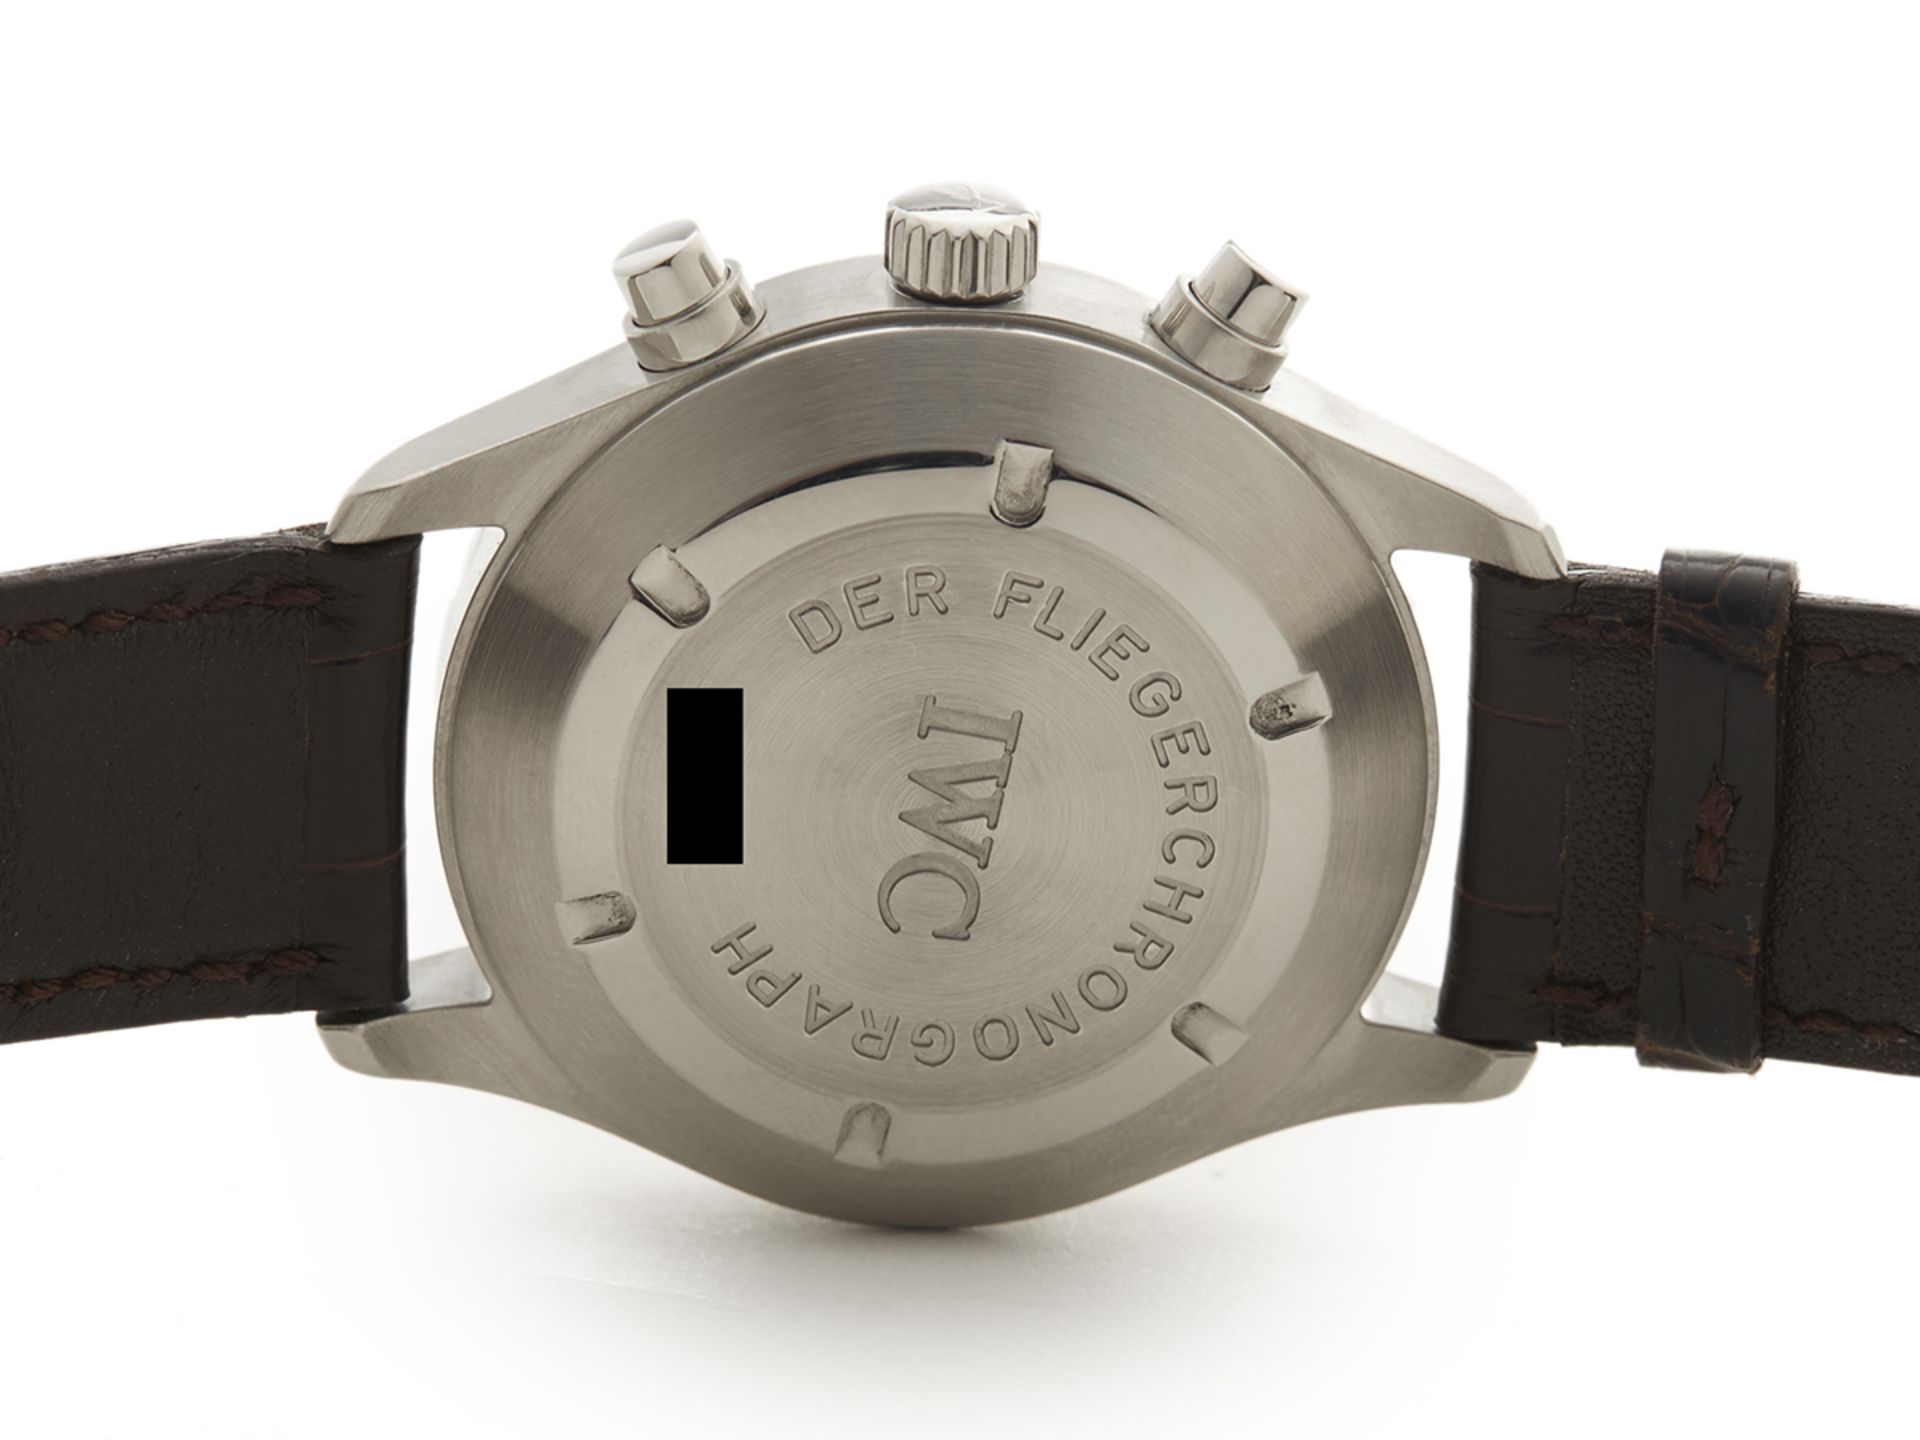 IWC Pilot's Chronograph Fliegerchronograph 39mm Stainless Steel IW3706 - Image 8 of 8